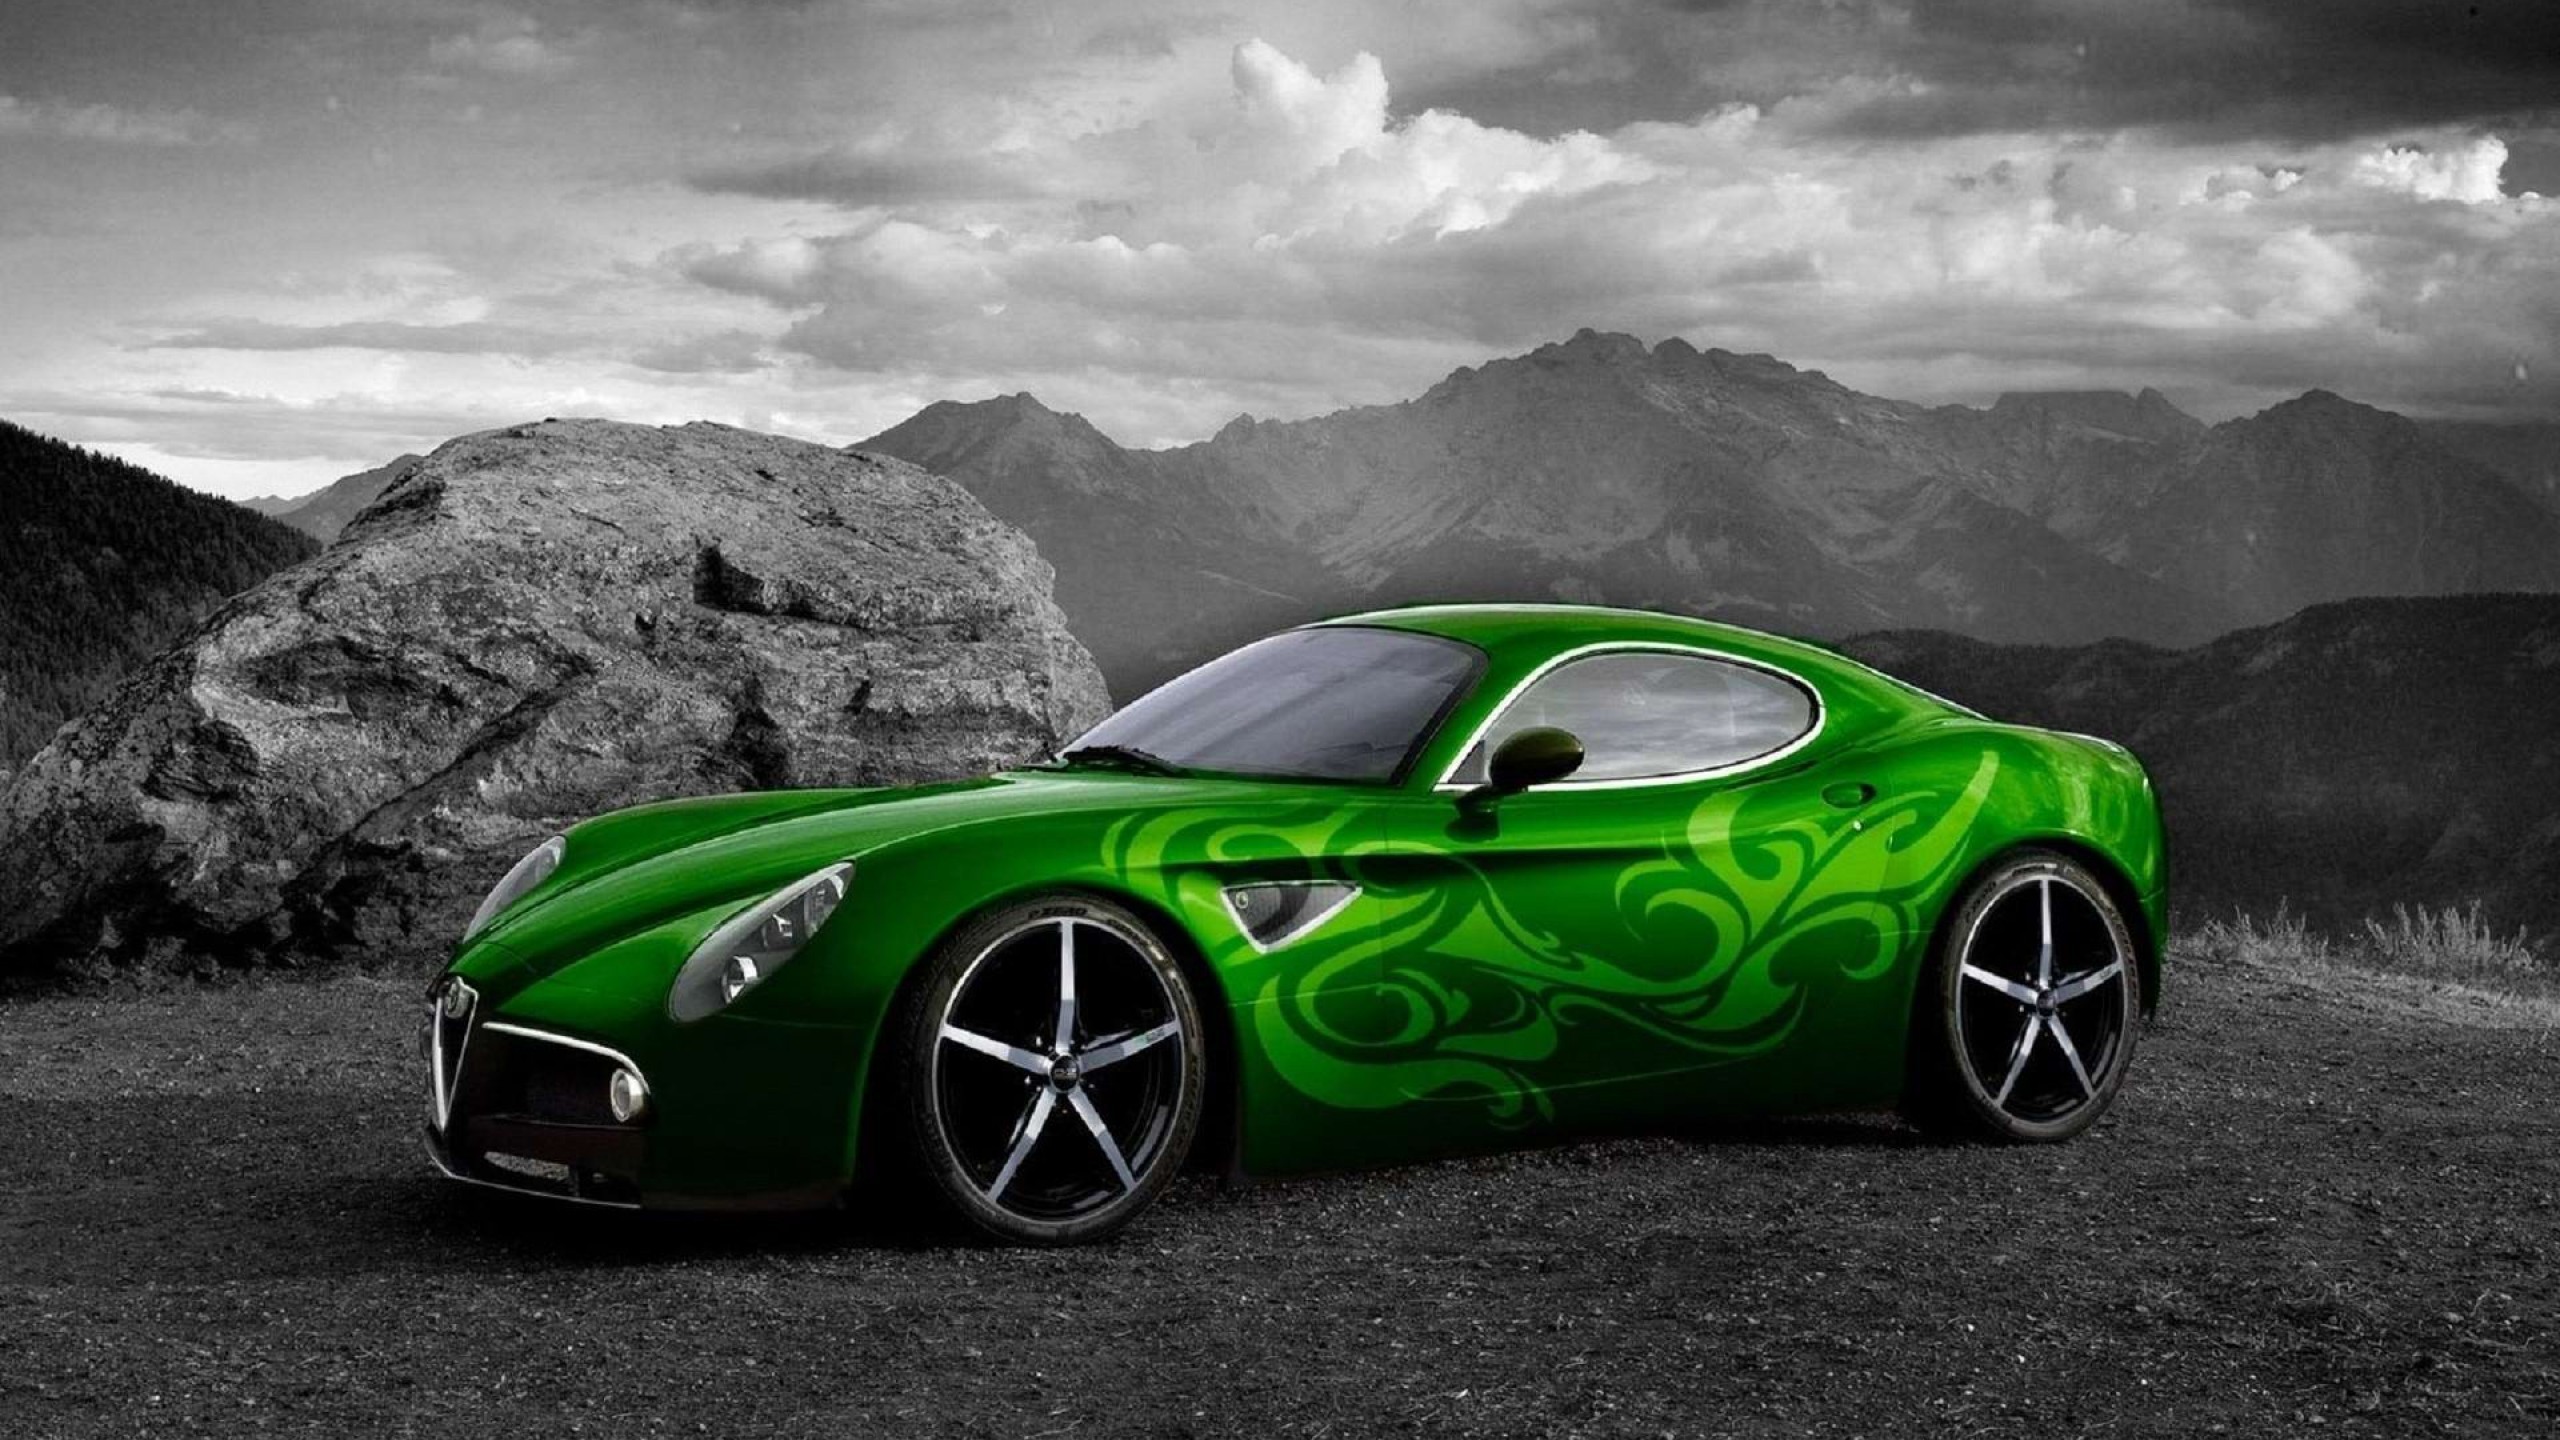 Green Car On Black And White Background Wallpaper Image